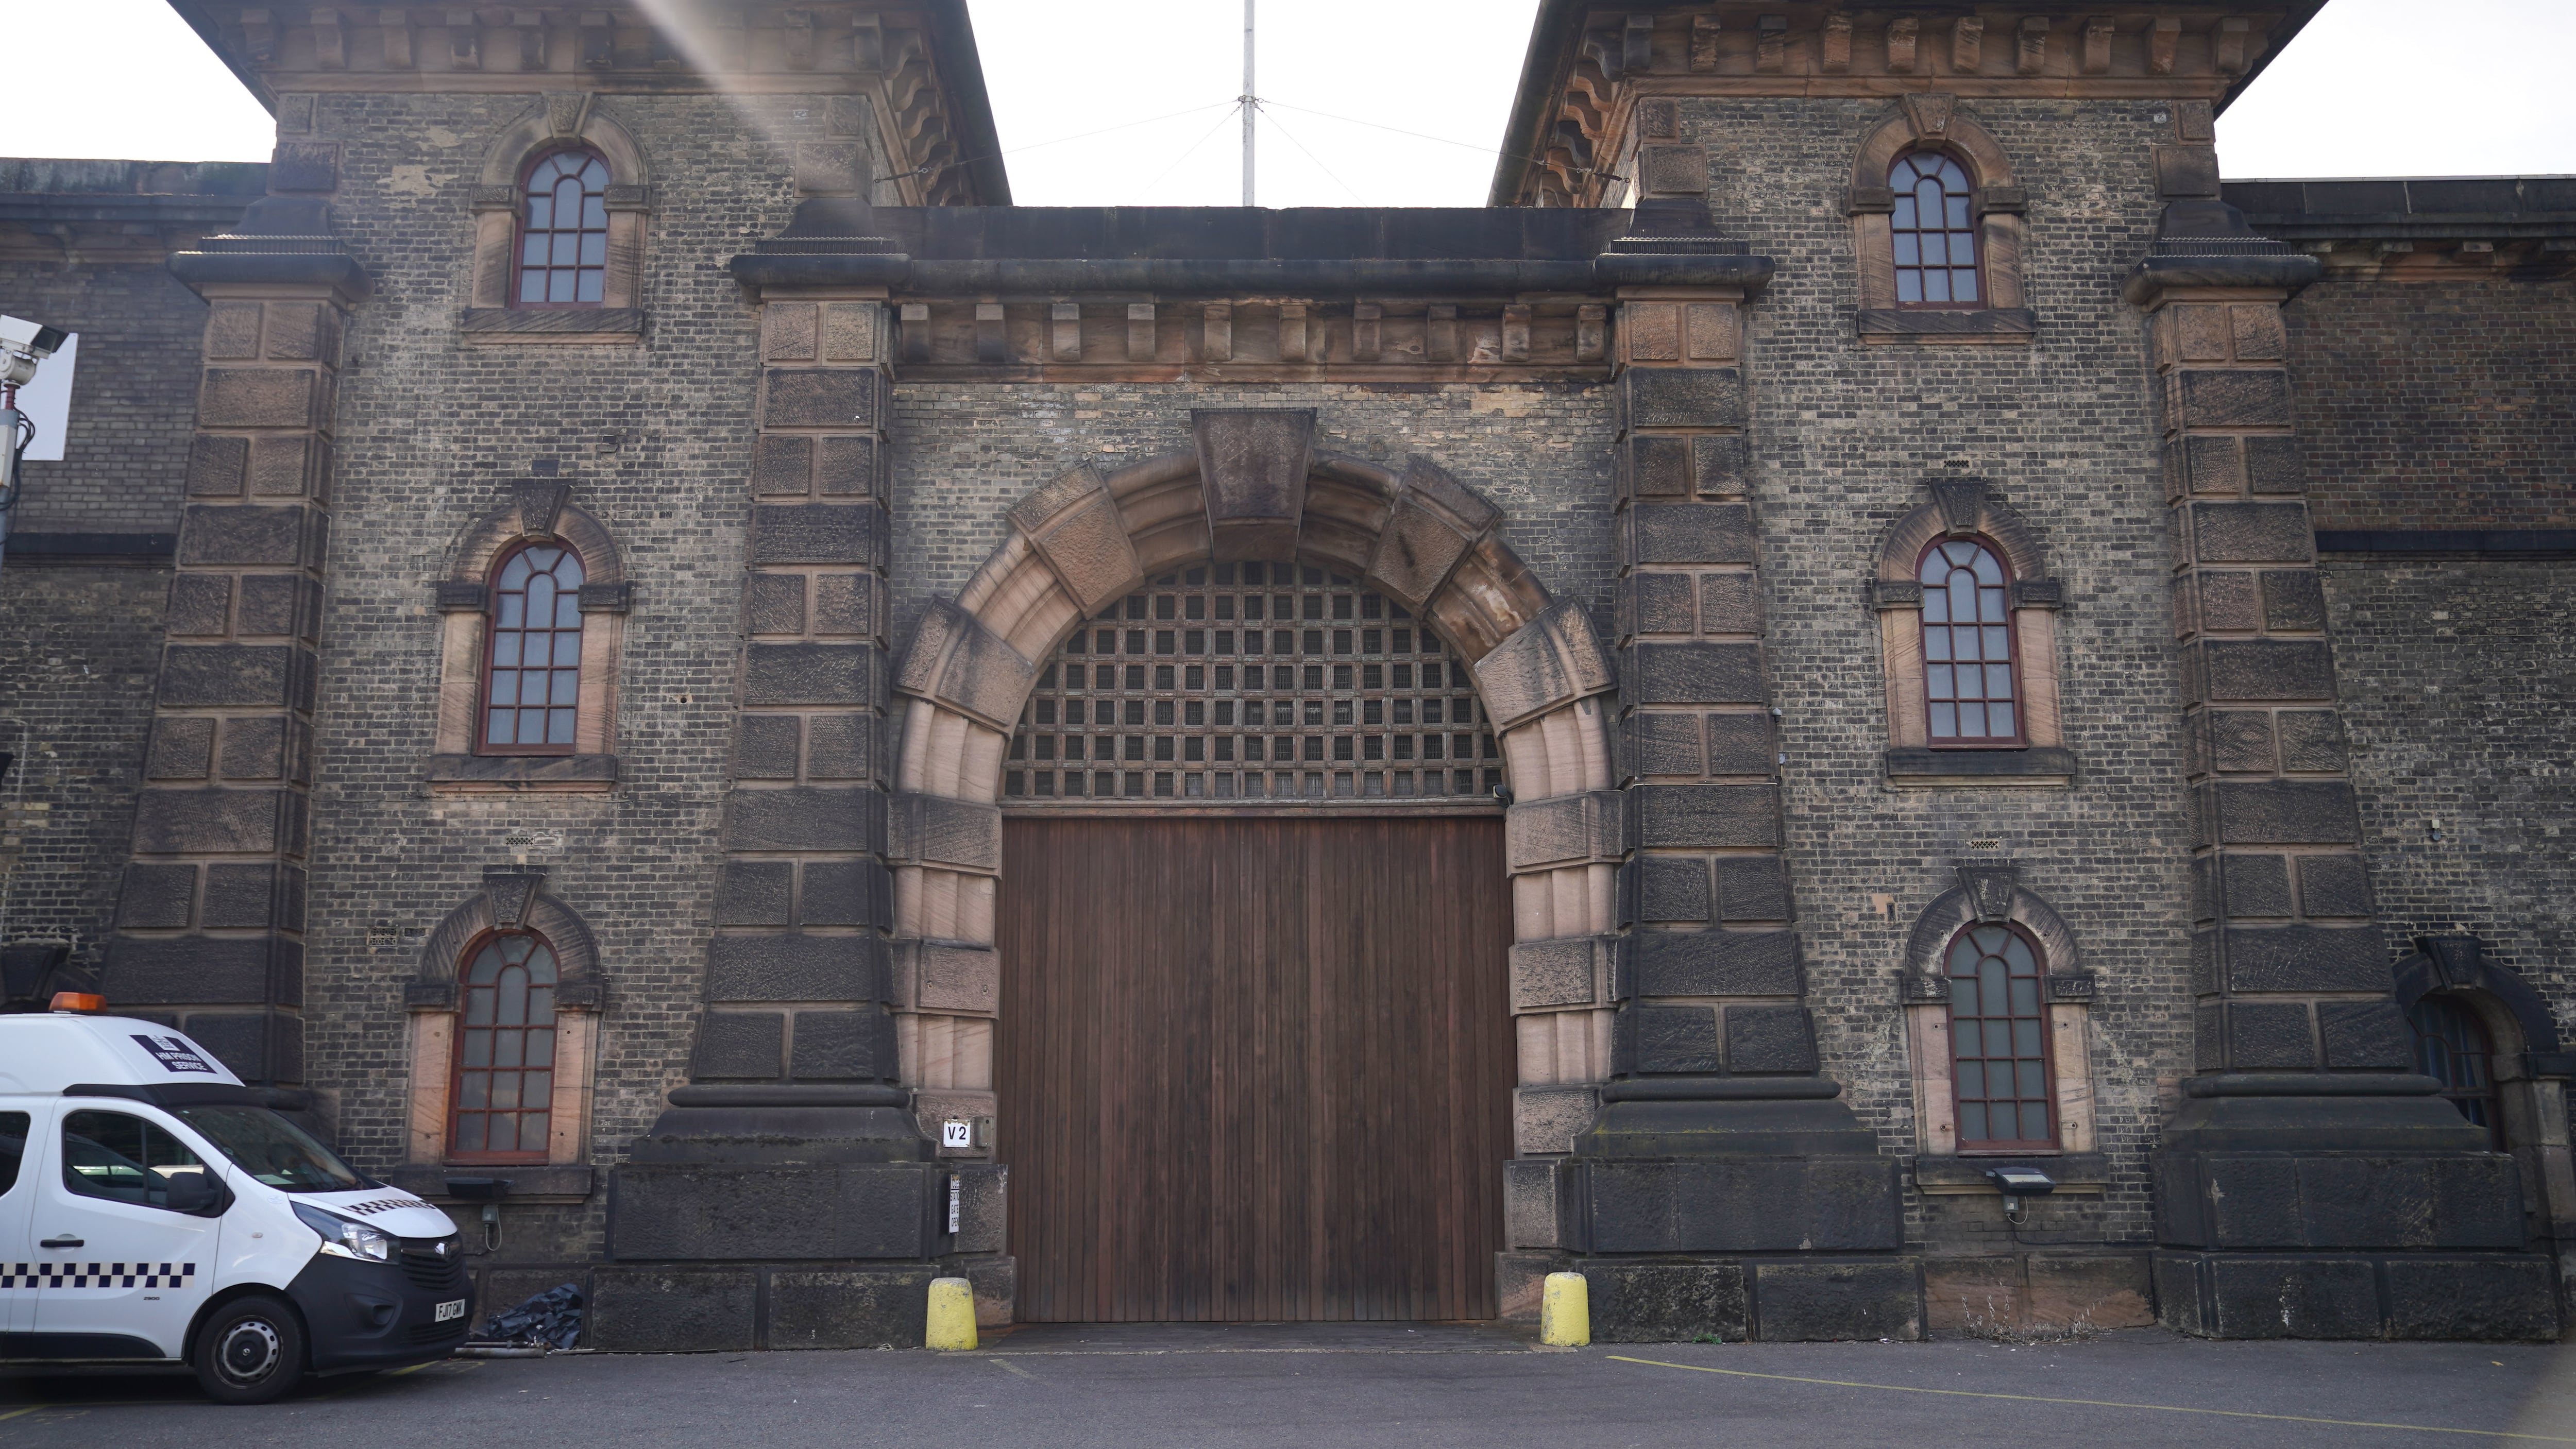 A watchdog has called for Wandsworth prison to be put into emergency measures